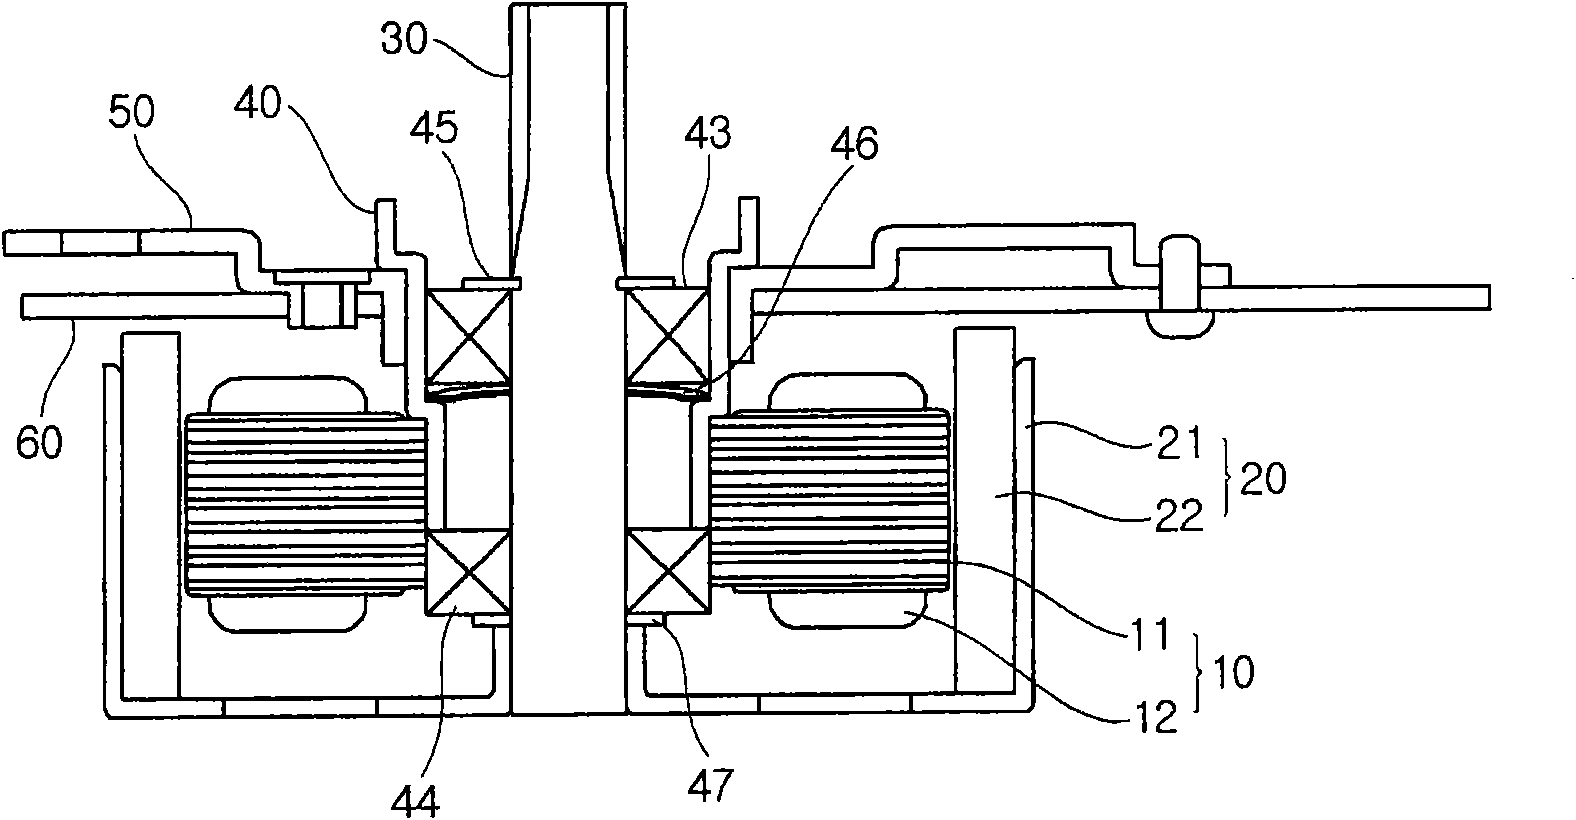 Structure of supporting core assembly and bearing for a bldc